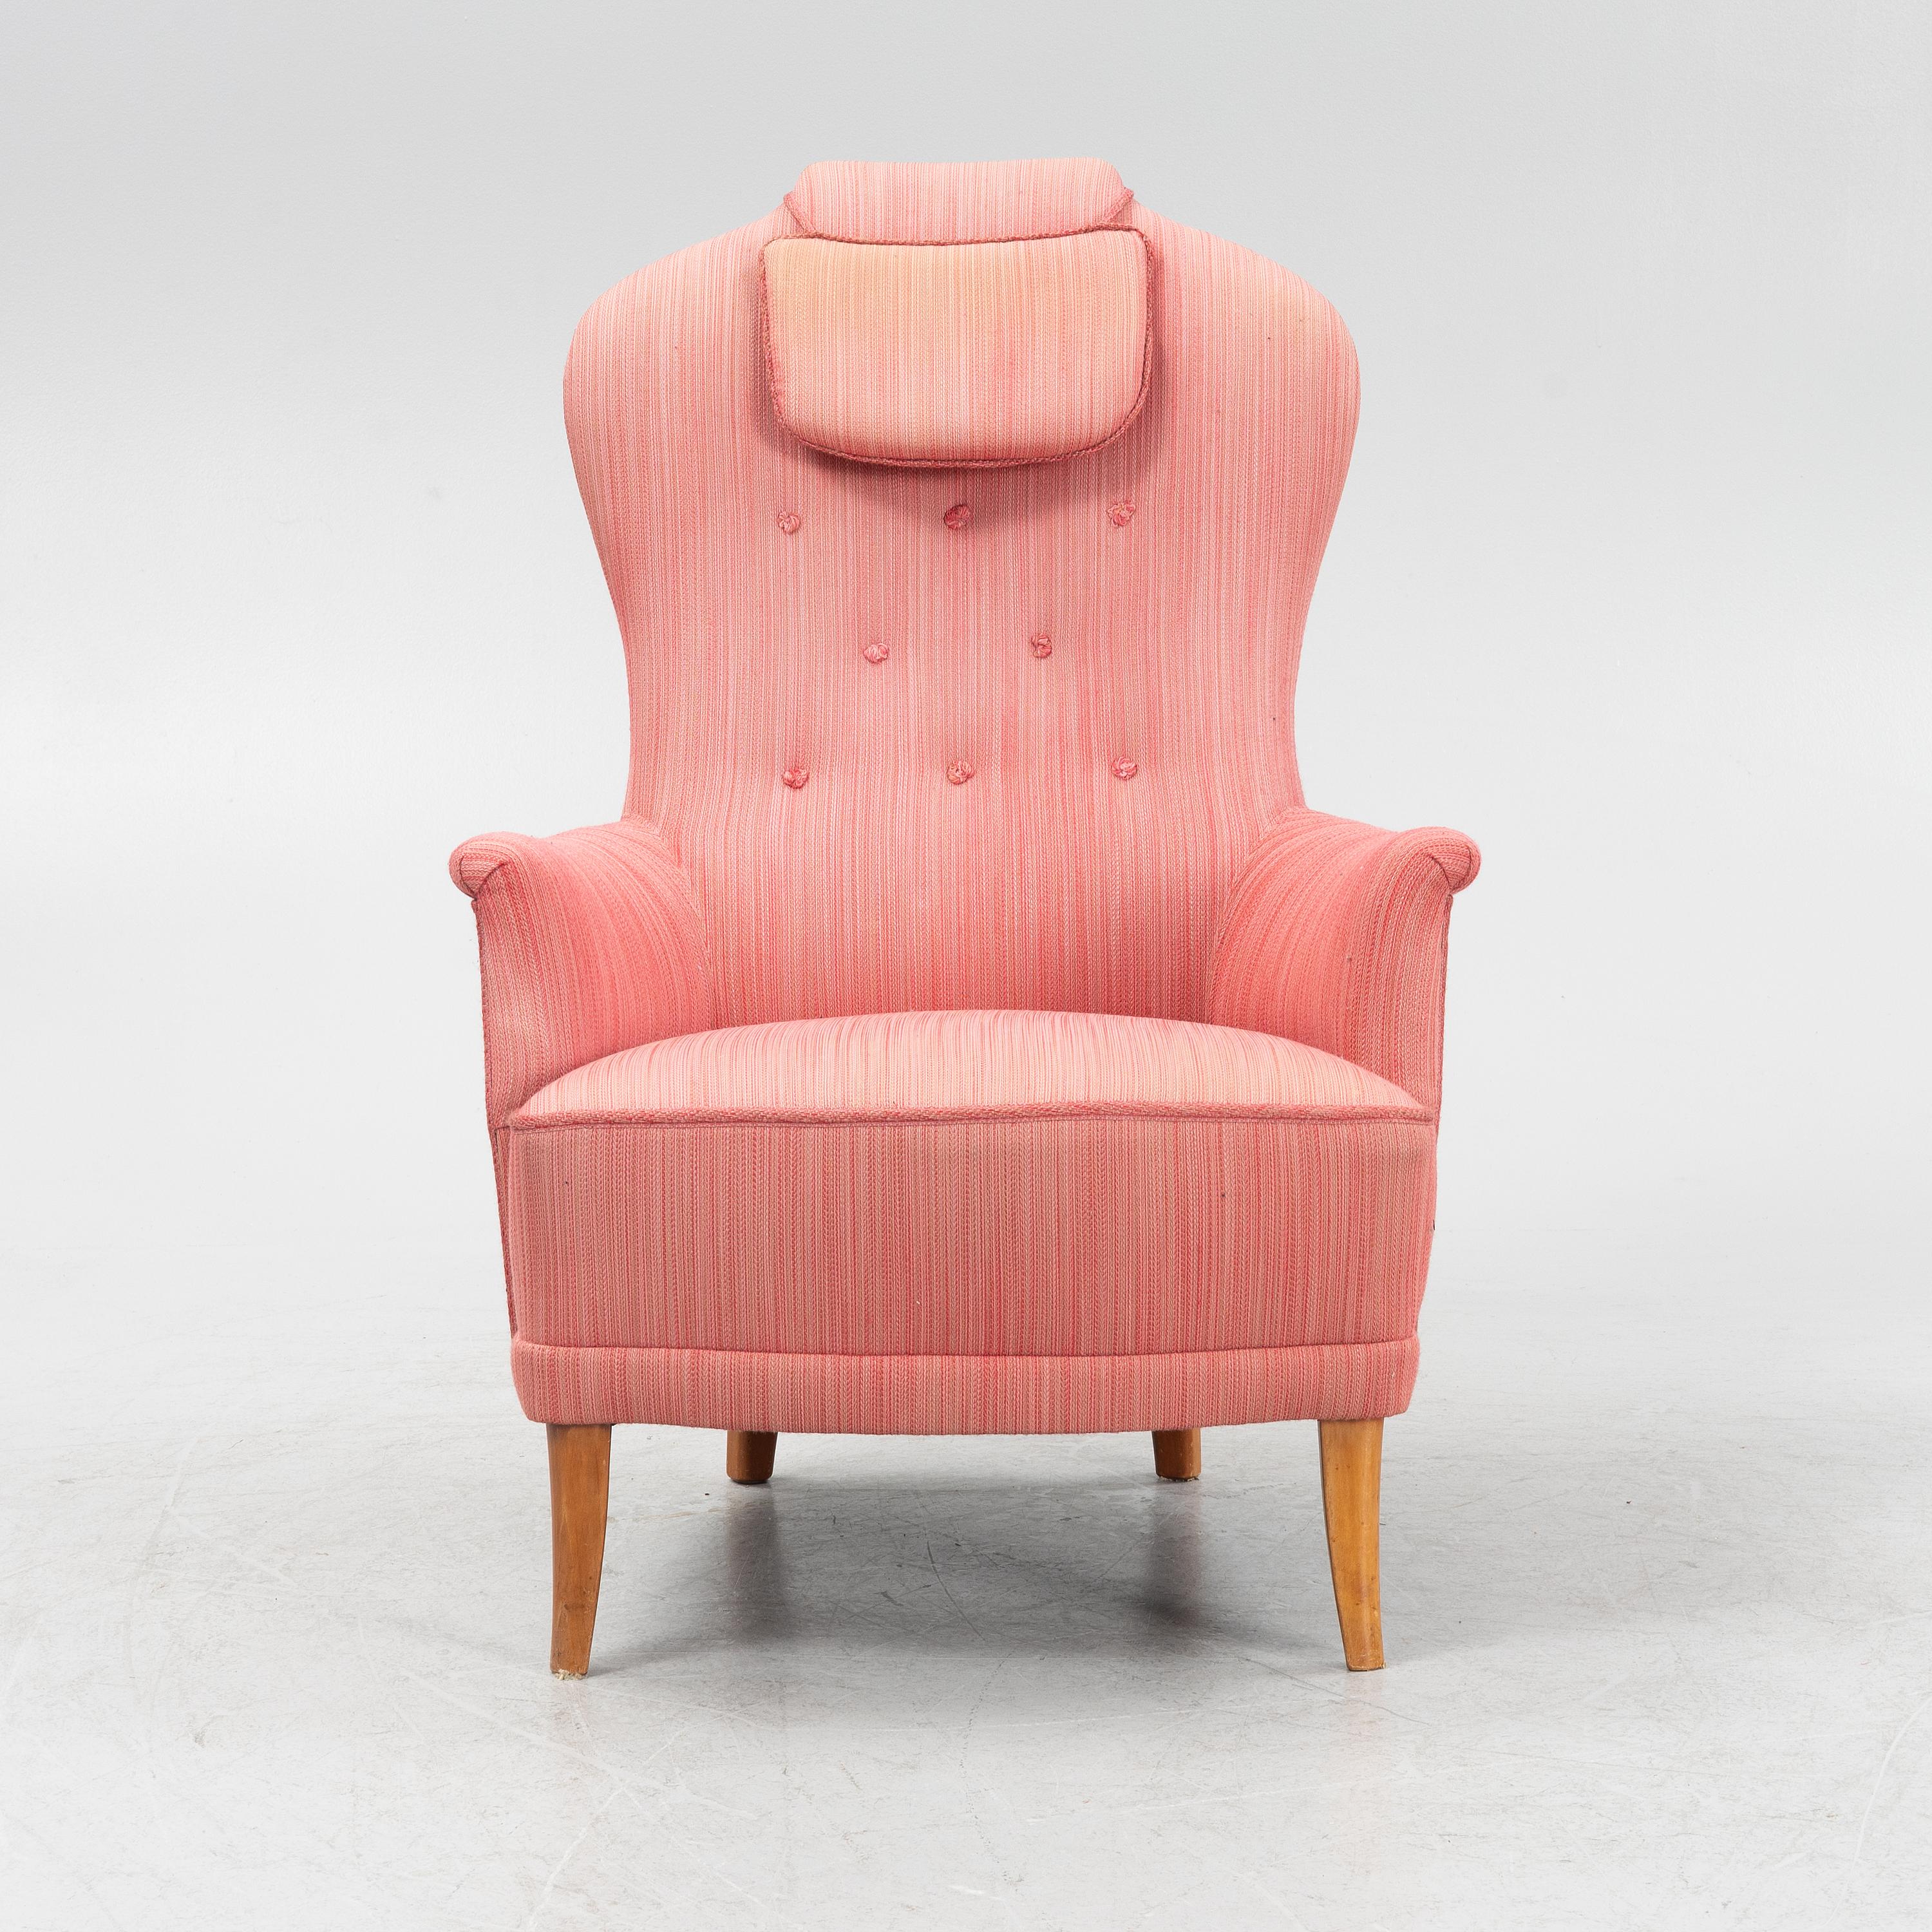 “Farmor” Armchairs by Carl Malmsten for O.H. Sjögren, Sweden circa 1957
Good condition, upholstered in light pink fabric

In the mid-1950s, Carl Malmsten awarded ten small furniture companies, mainly in Småland, the honour of making a series of some